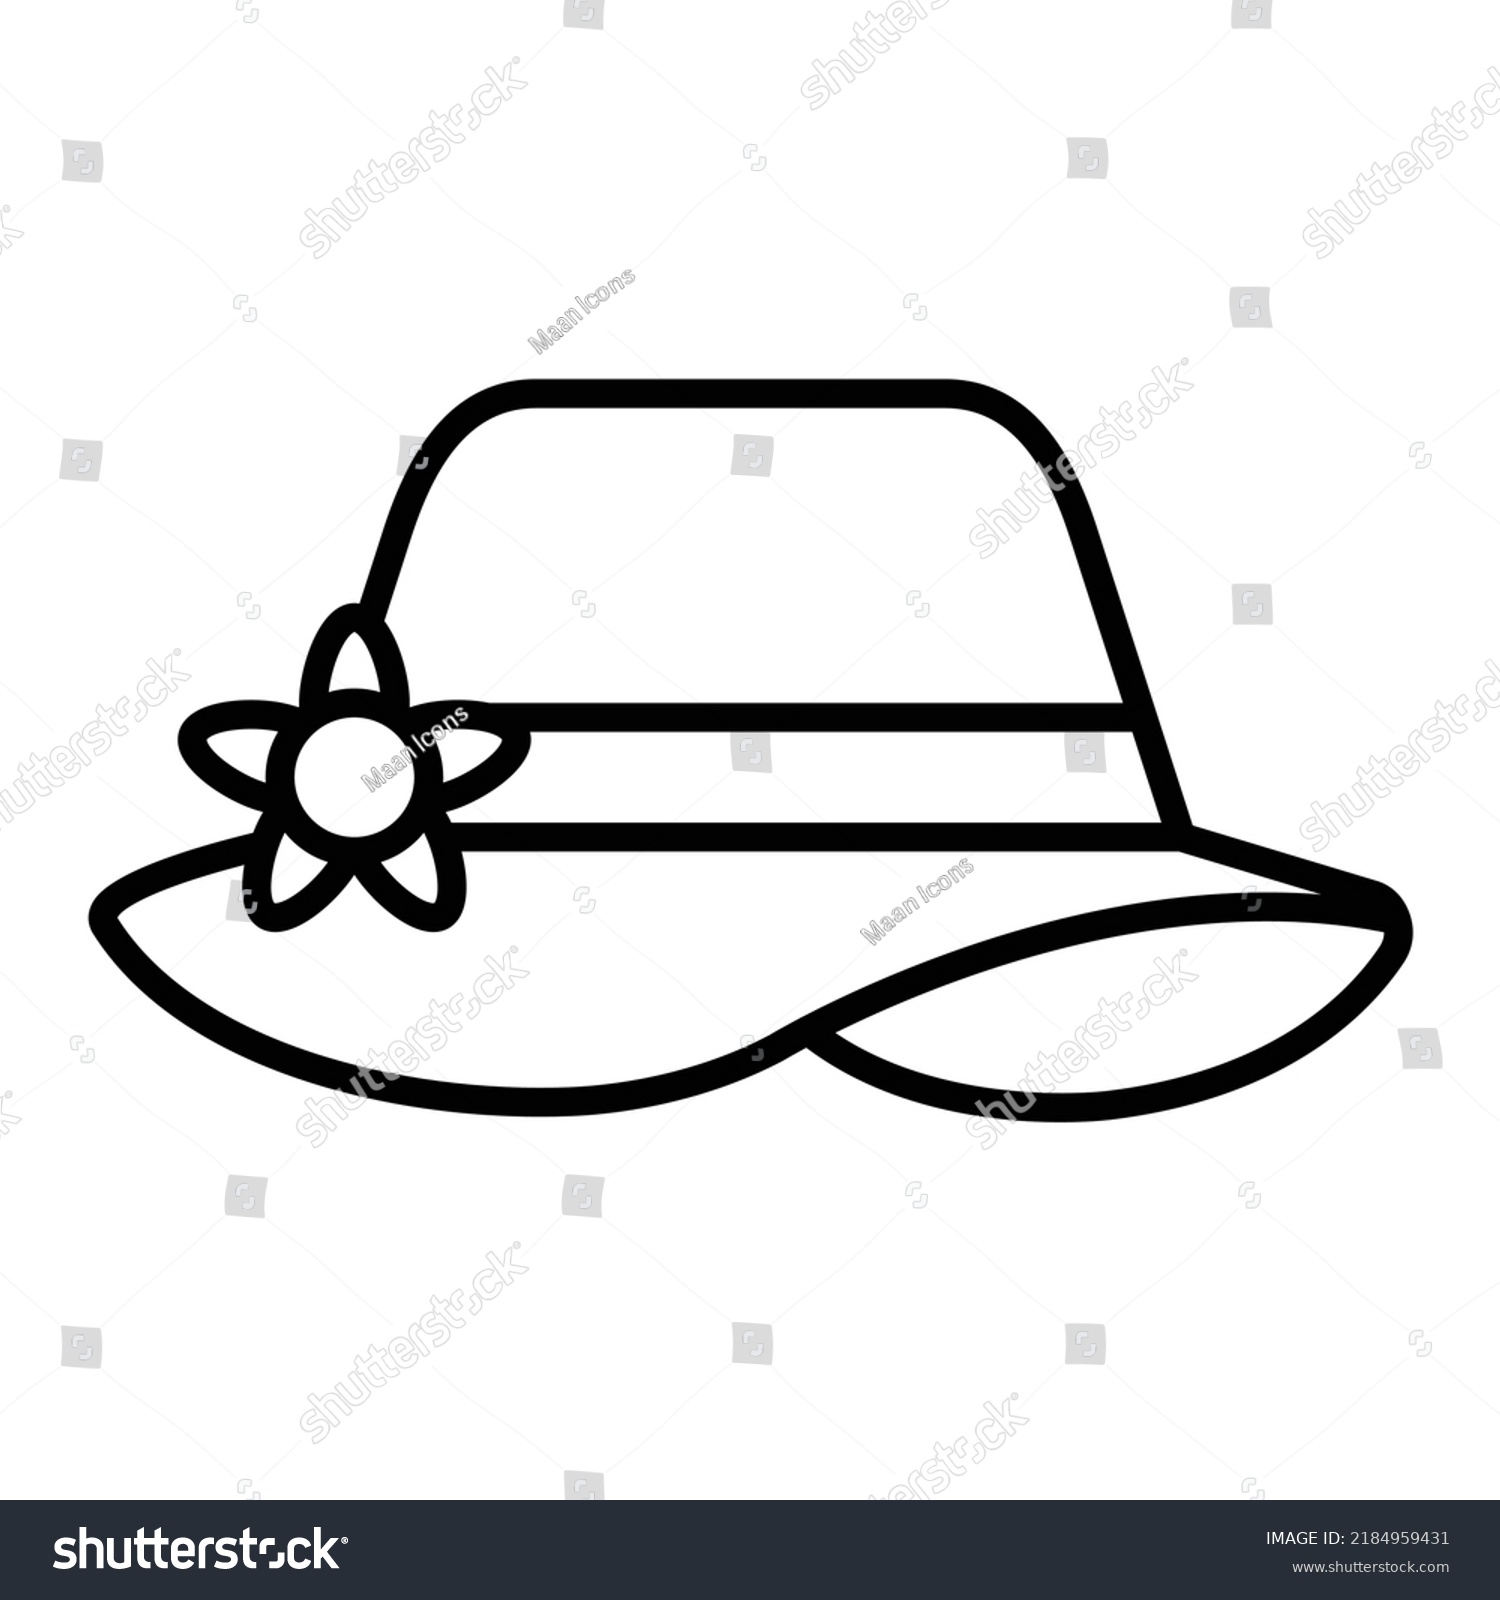 Pamela Vector Icon Can Be Used Stock Vector (Royalty Free) 2184959431 ...